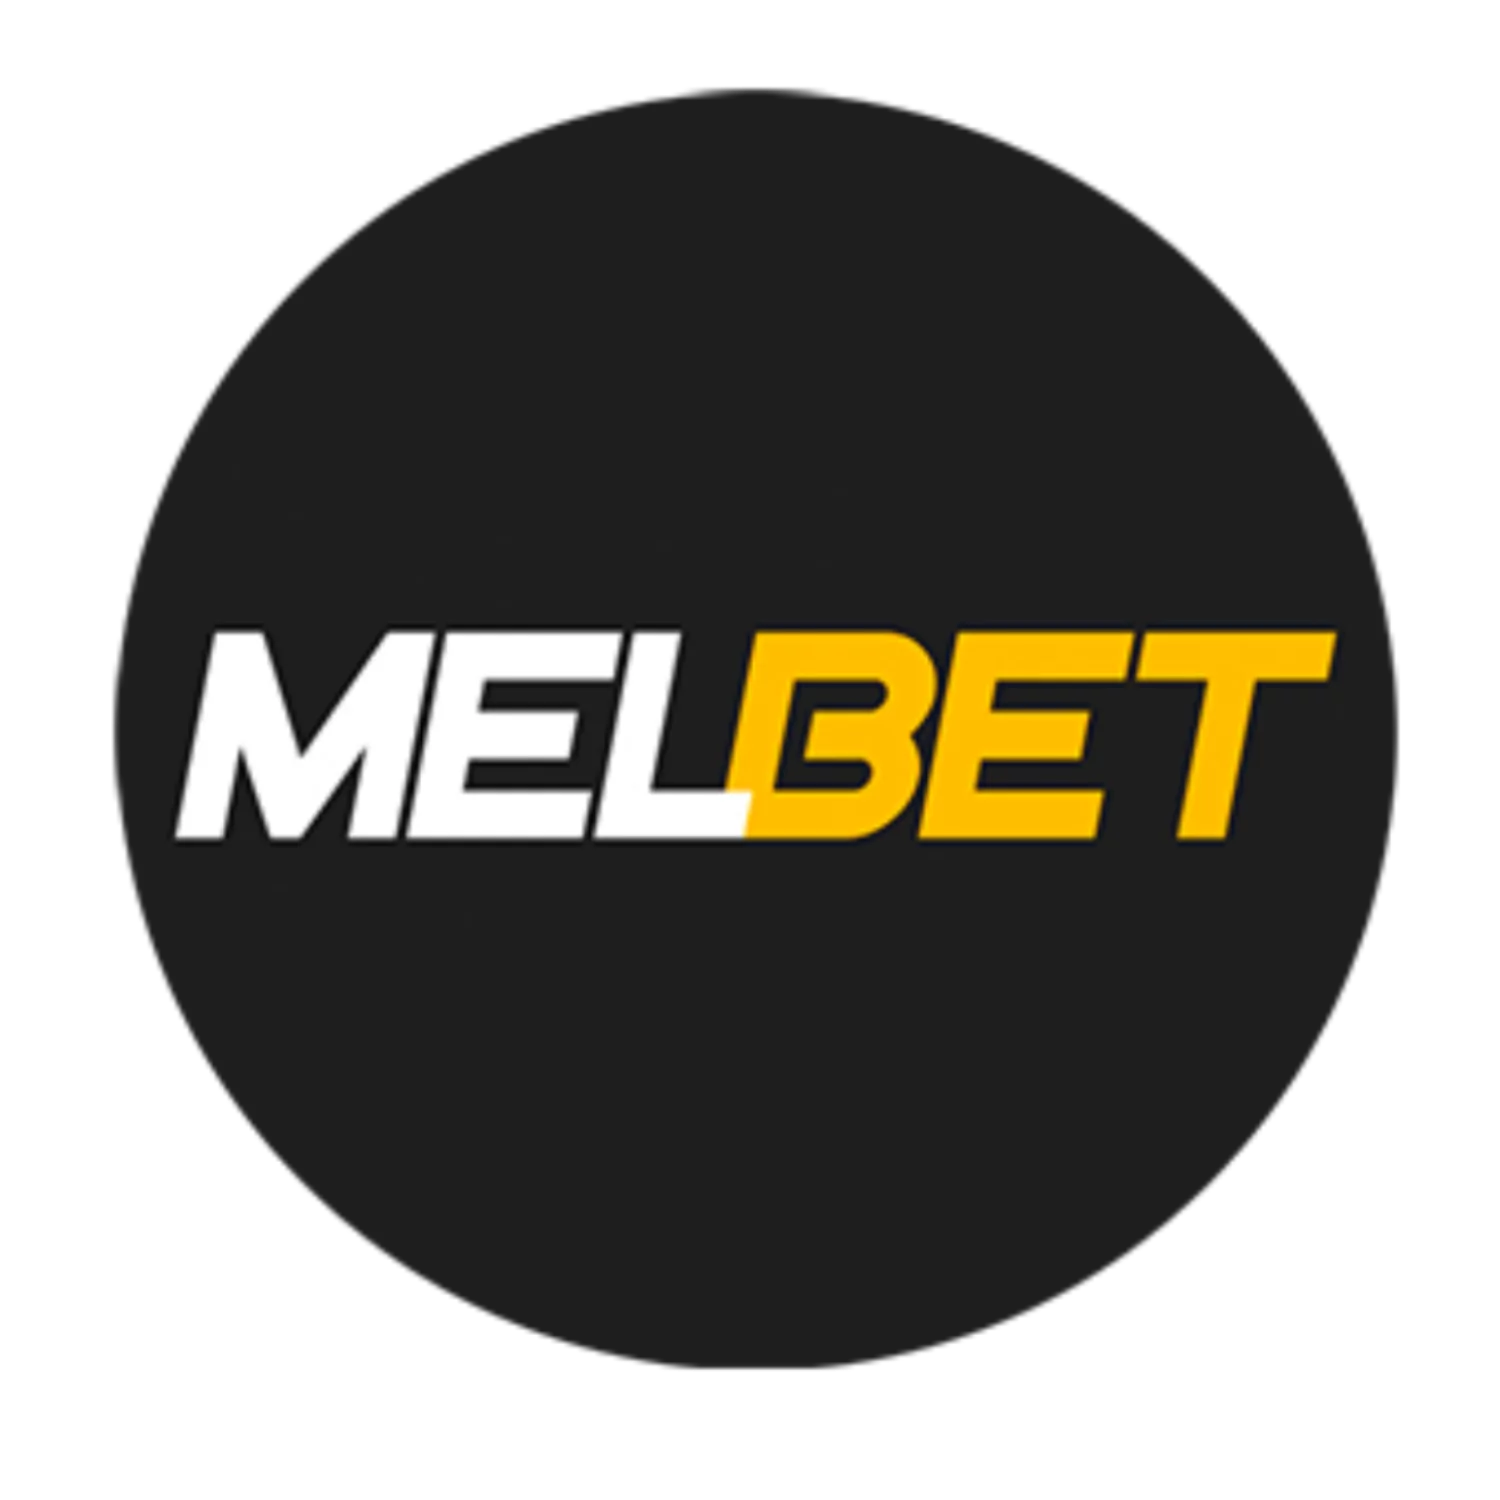 You'll learn about registration and verification process, mobile app, casino games and bonuses at Melbet.